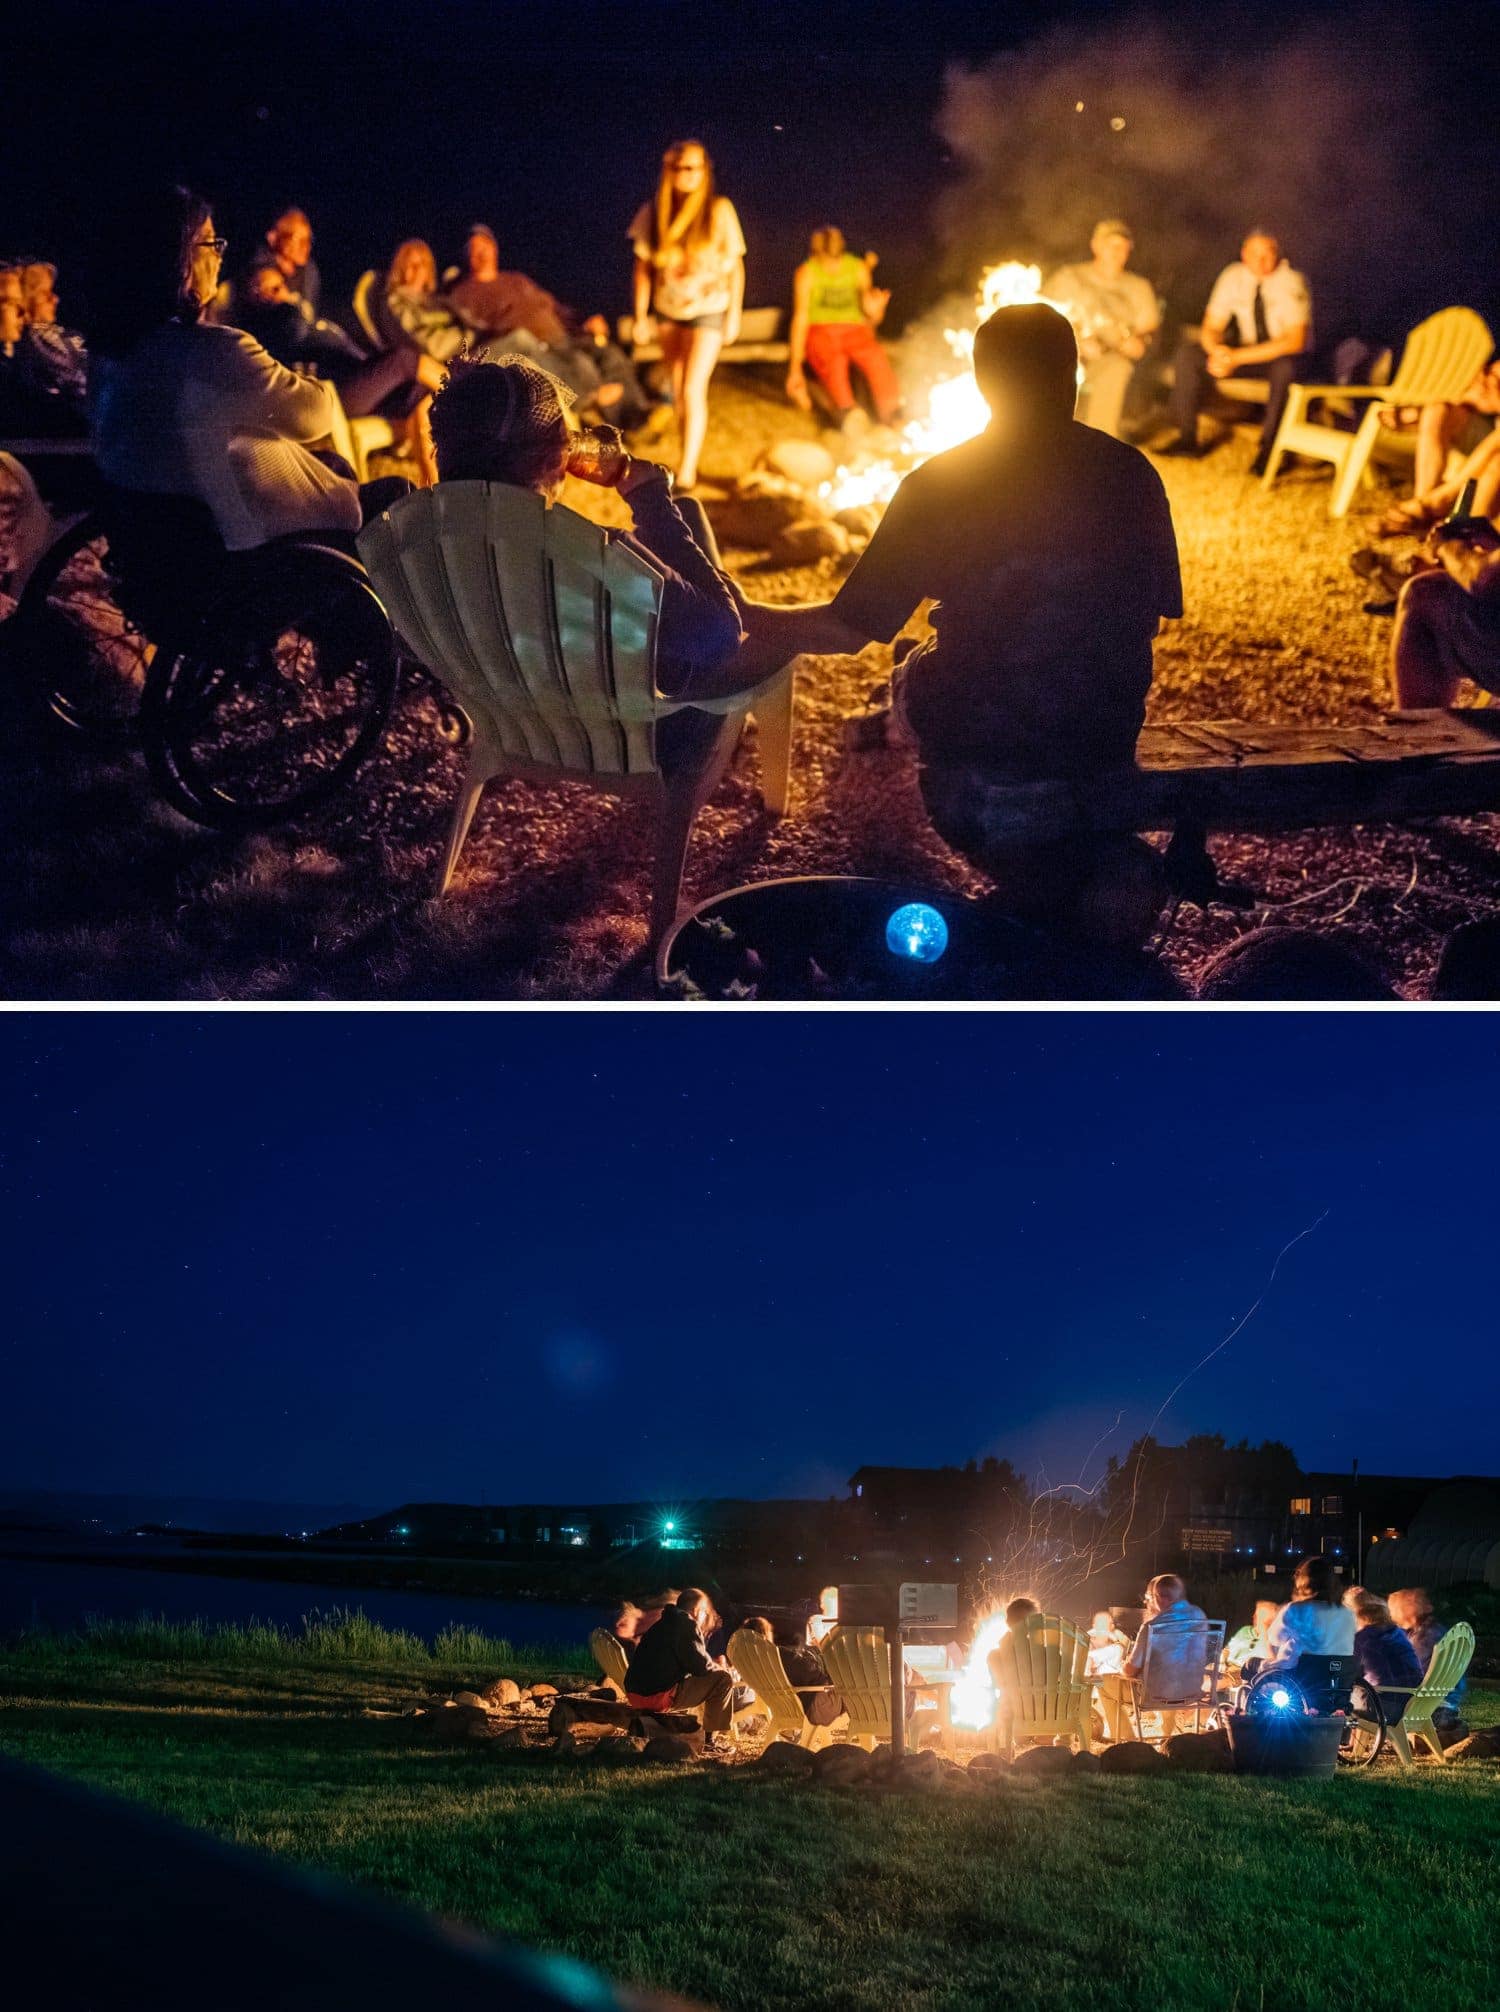 Friends and family gather around a campfire at night in Grand Lake, Colorado.